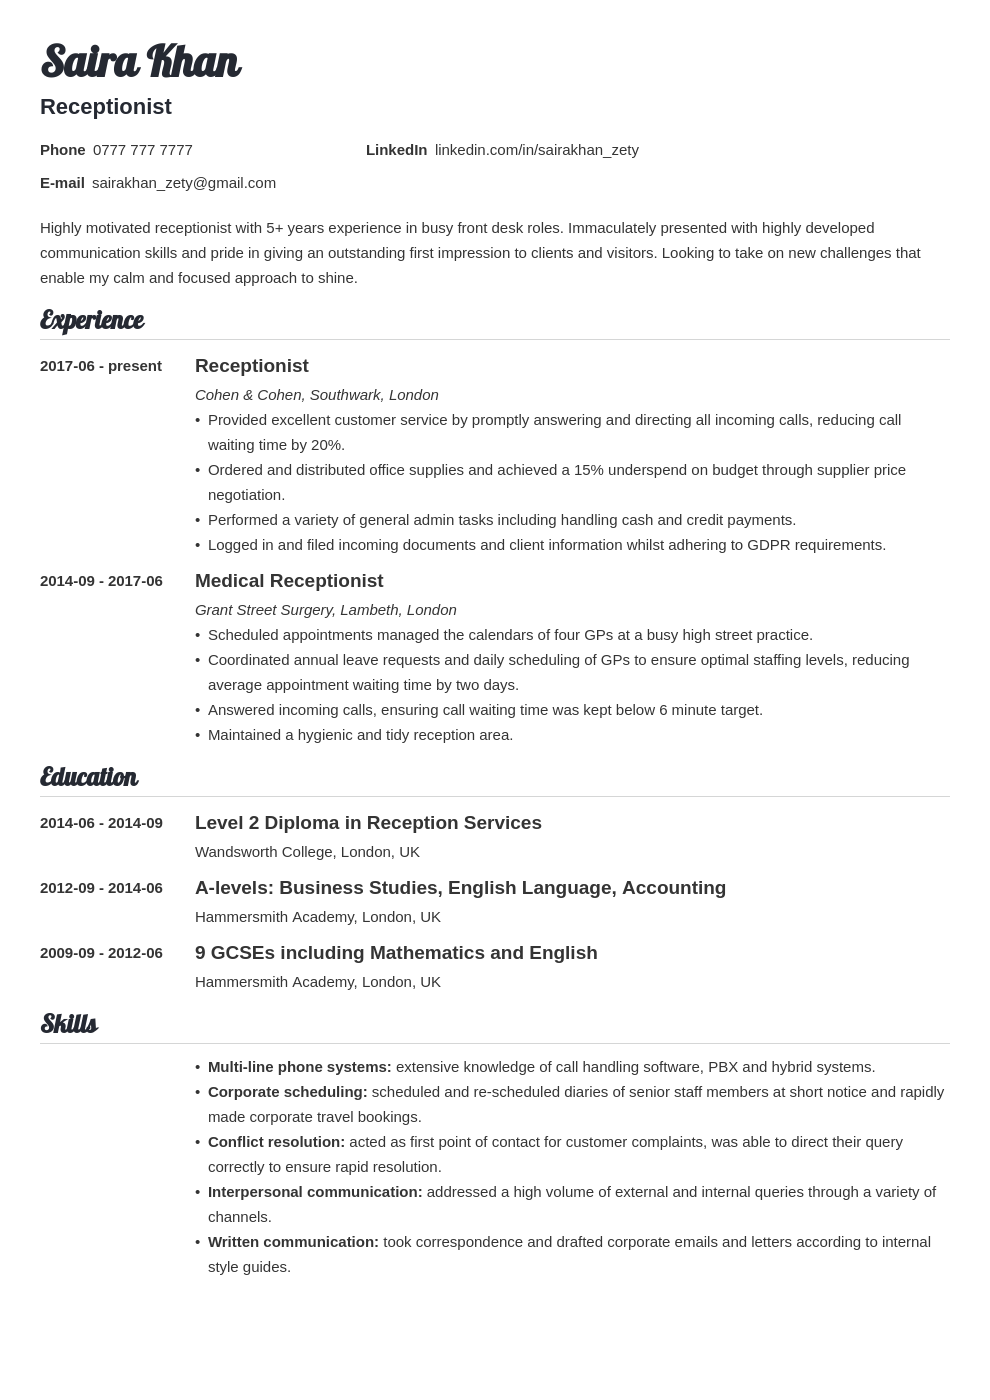 roles of receptionist resume